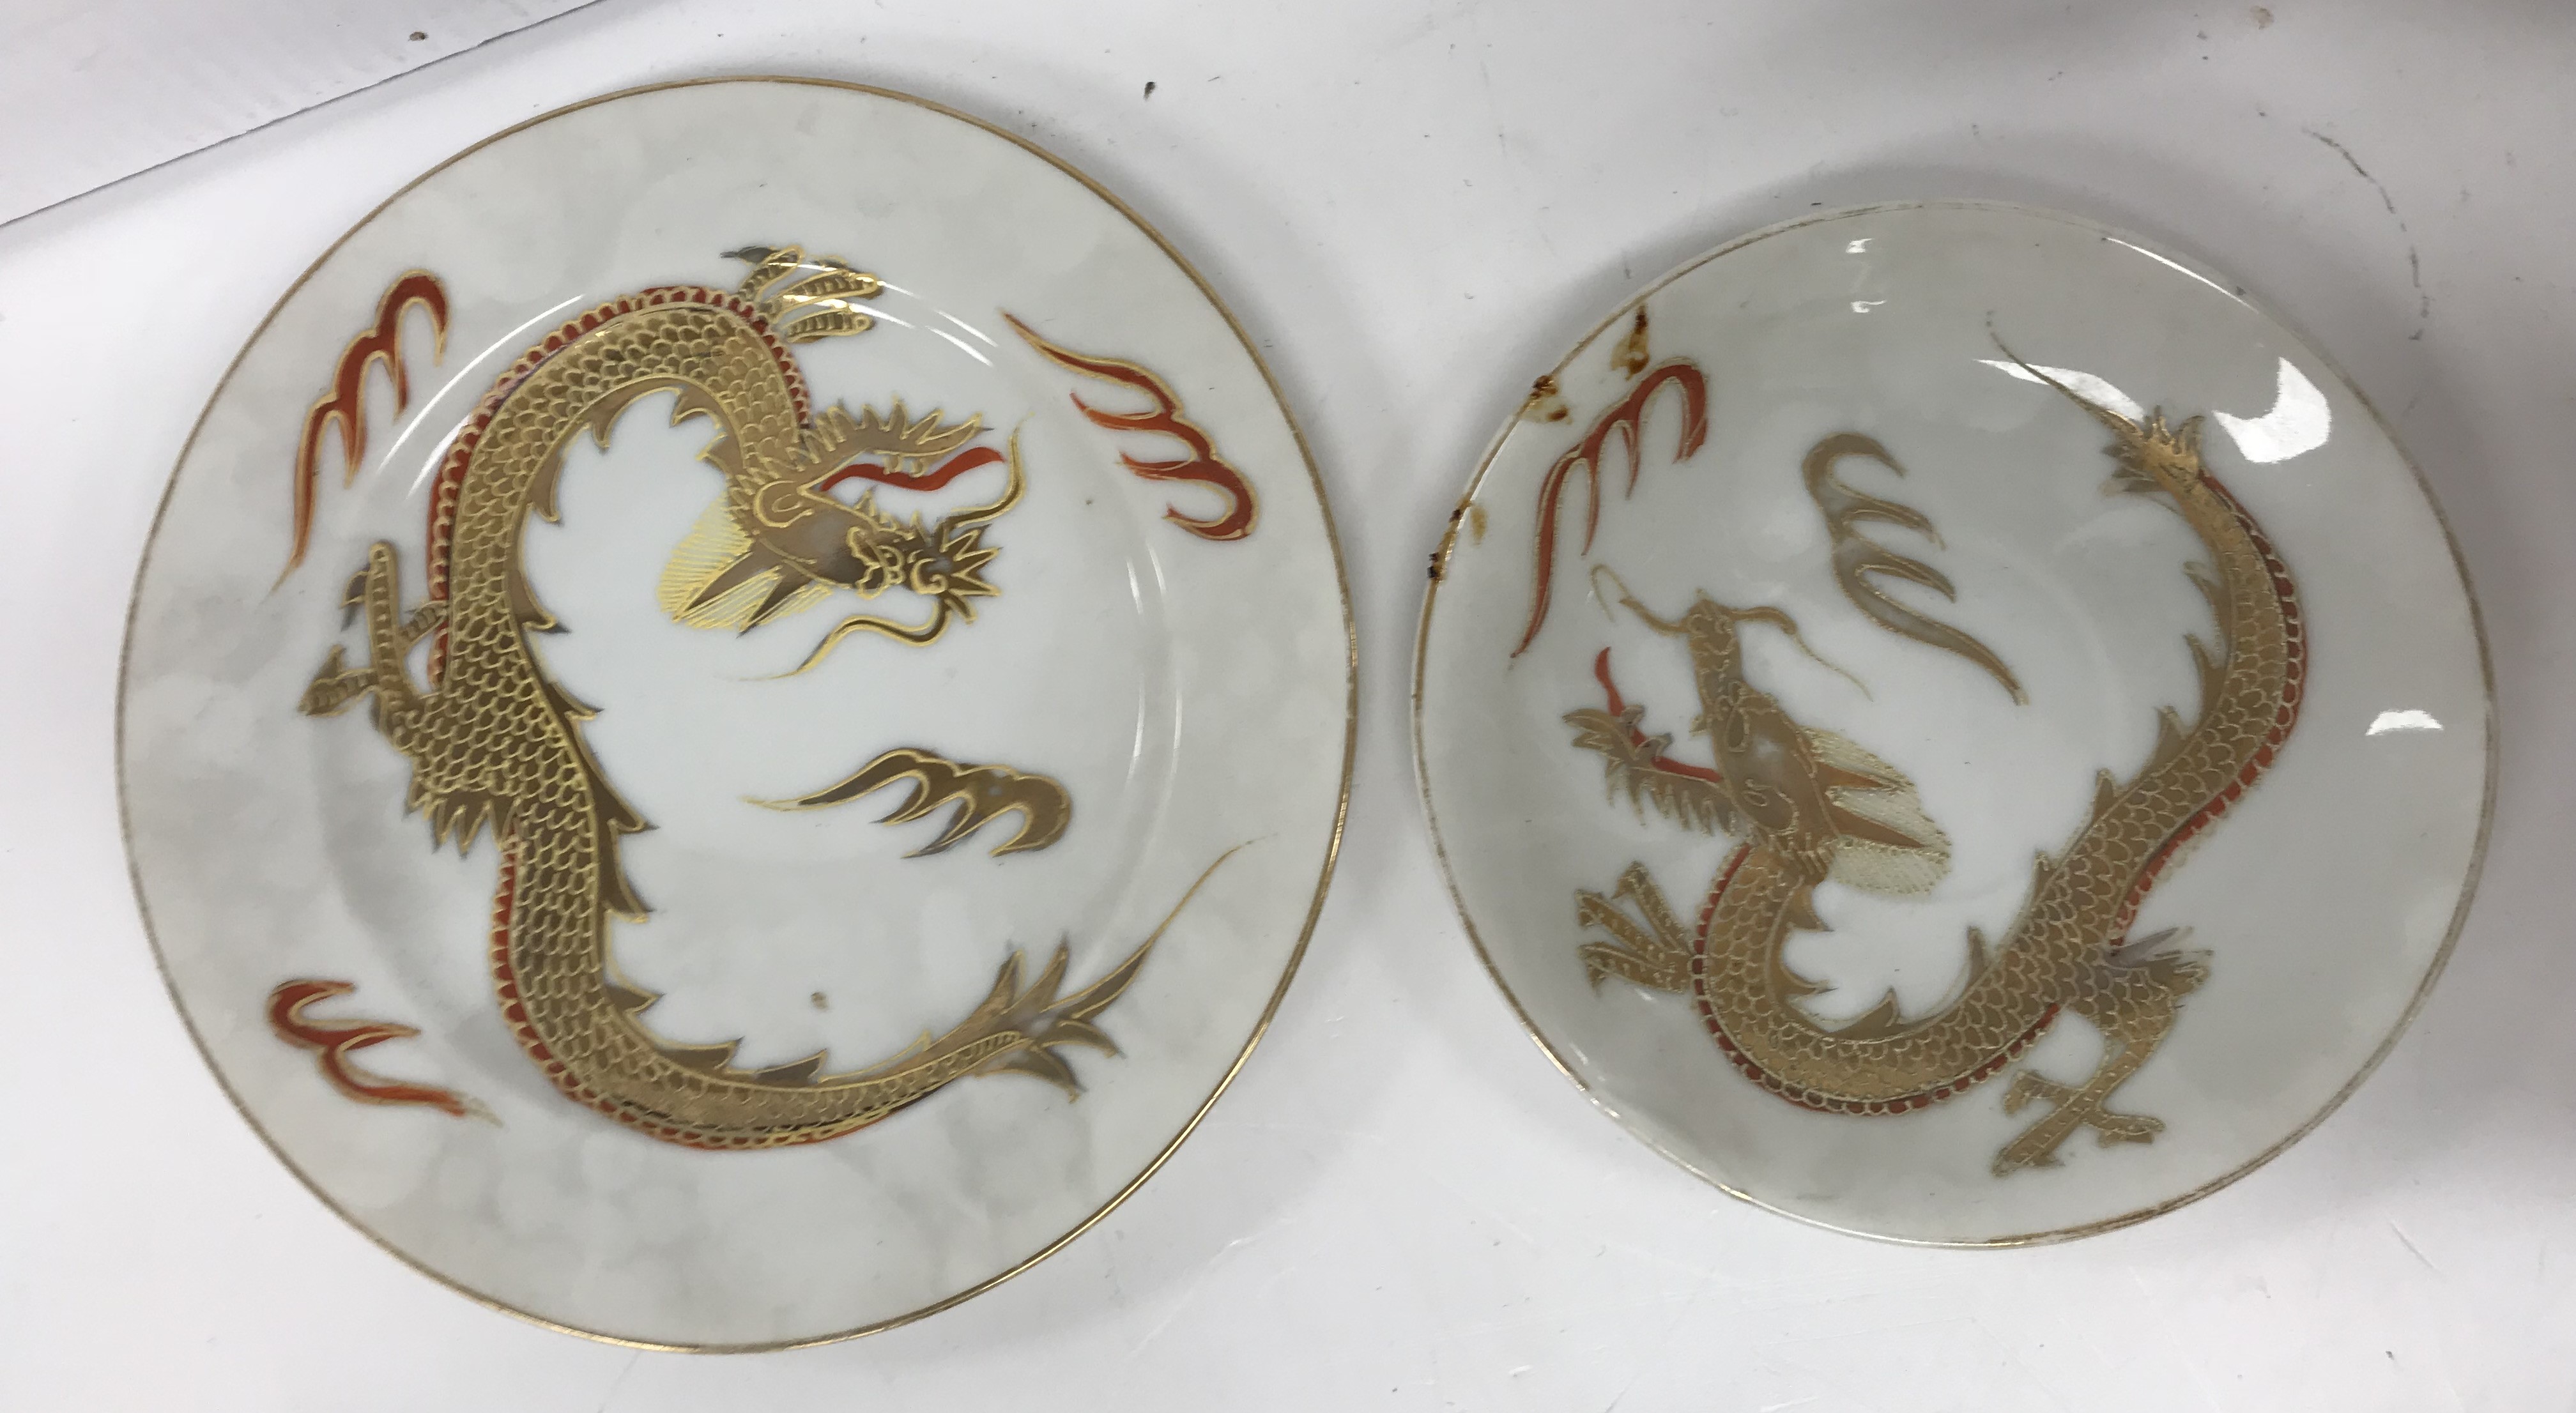 A collection of various Japanese and Chinese pottery and porcelain including a Japanese dragon - Image 8 of 10